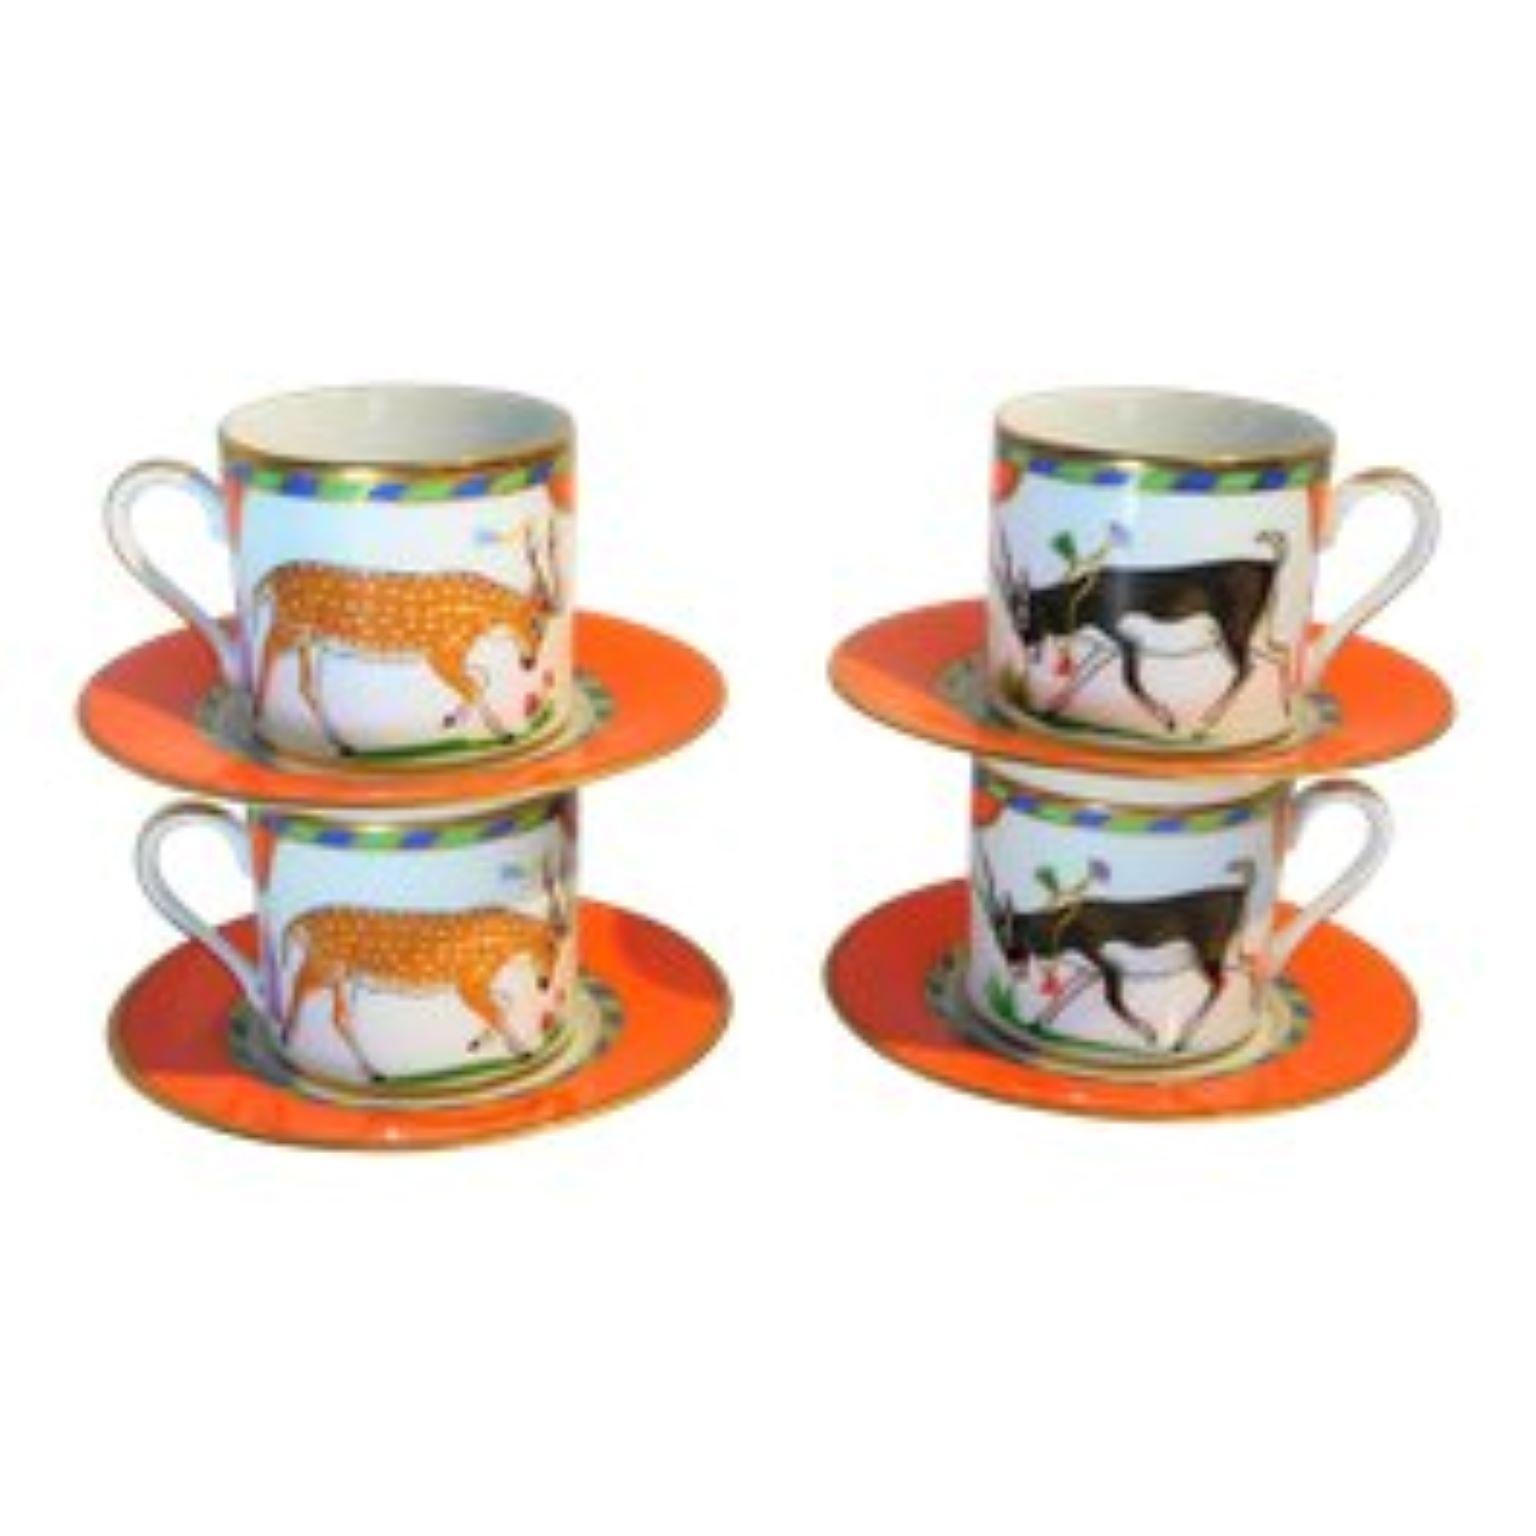 This colorful set of 4 demitasse cups and 4 saucers by Lynn Chase Designs, Inc. of Massachusetts, is expertly decorated in under-glaze colors trimmed with pure 24-karat gold. The colors include vibrant orange, blue, green, fawn, fuchsia, purple,